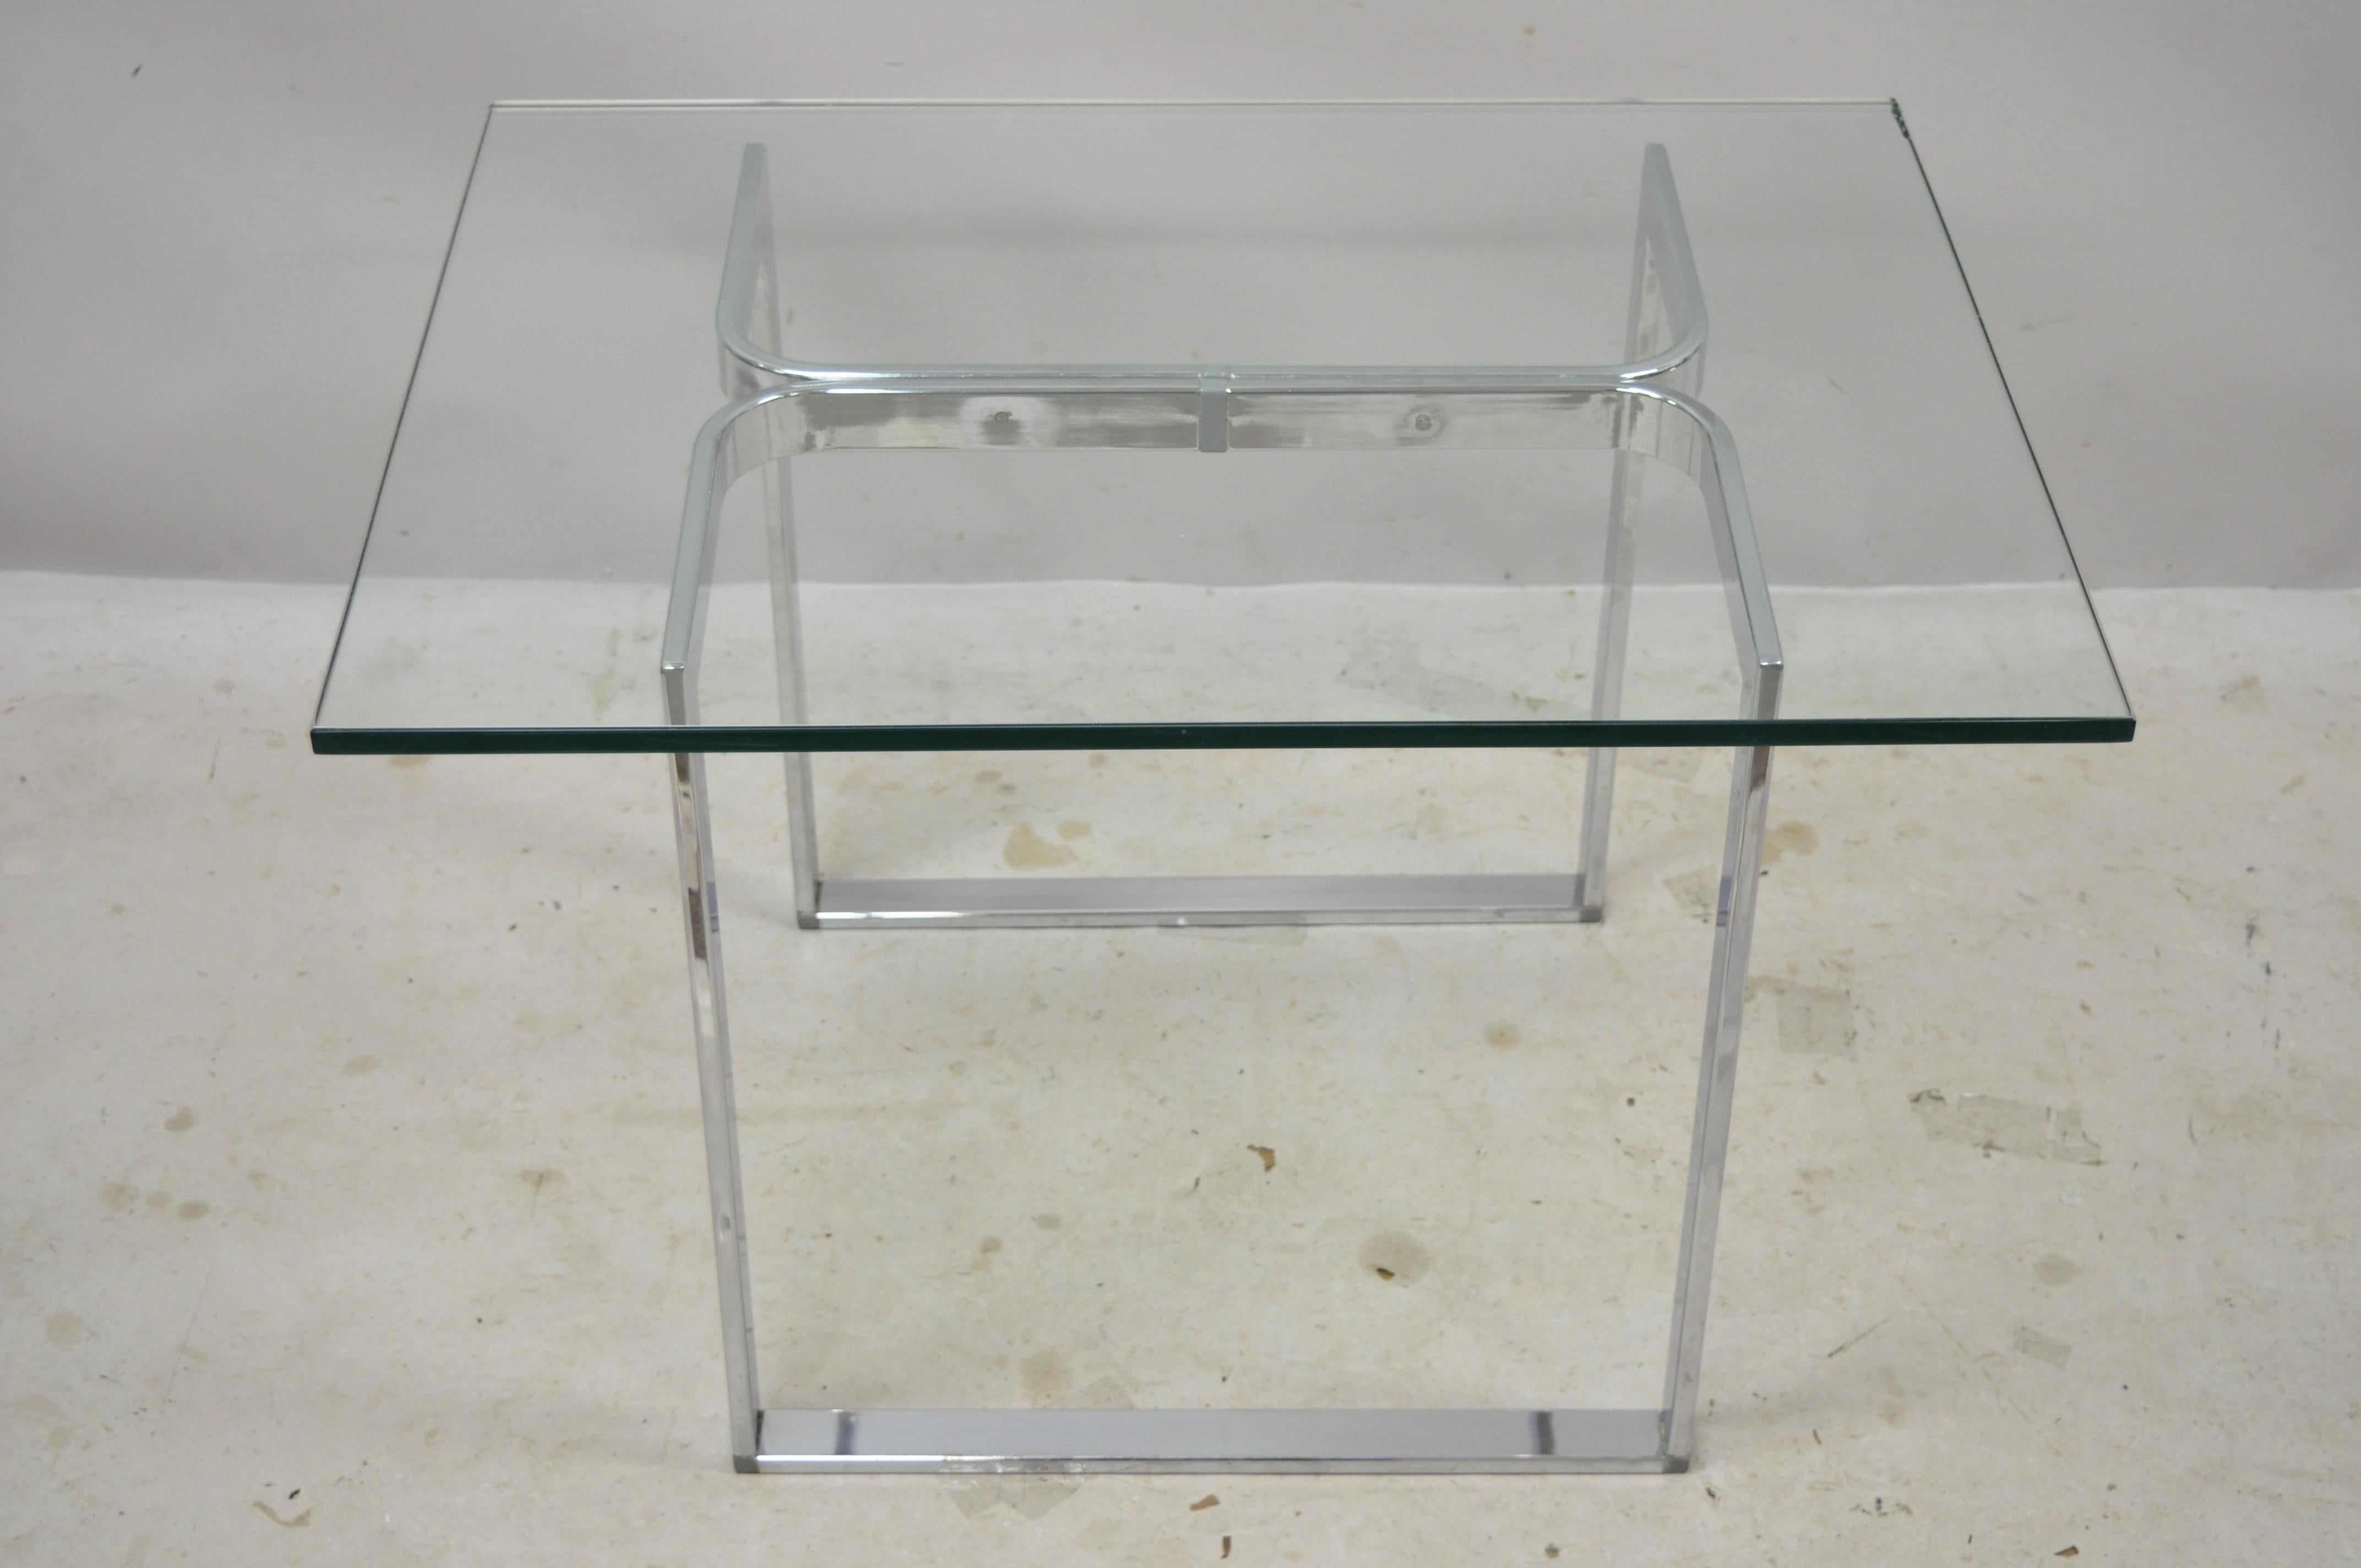 Mid-Century Modern sculpted chrome base rectangular glass top occasional side table. Item features sculptural chrome base, thick rectangular glass top, clean modernist lines, great style and form. Circa mid-late 20th century. Measurements: 21.5